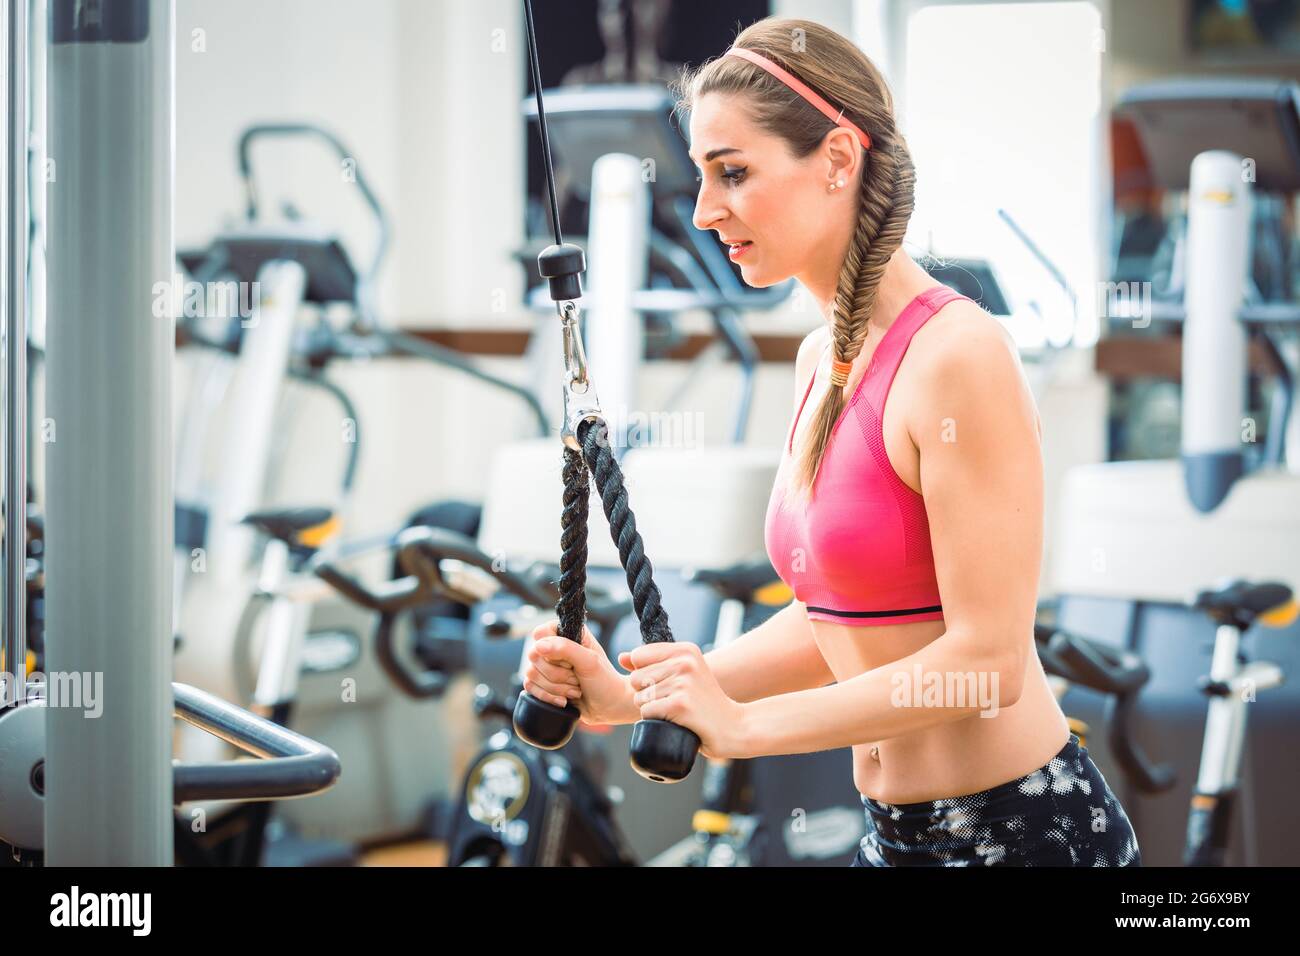 https://c8.alamy.com/comp/2G6X9BY/happy-and-beautiful-fit-woman-wearing-pink-fitness-bra-while-exercising-cable-rope-triceps-extension-at-the-gym-2G6X9BY.jpg